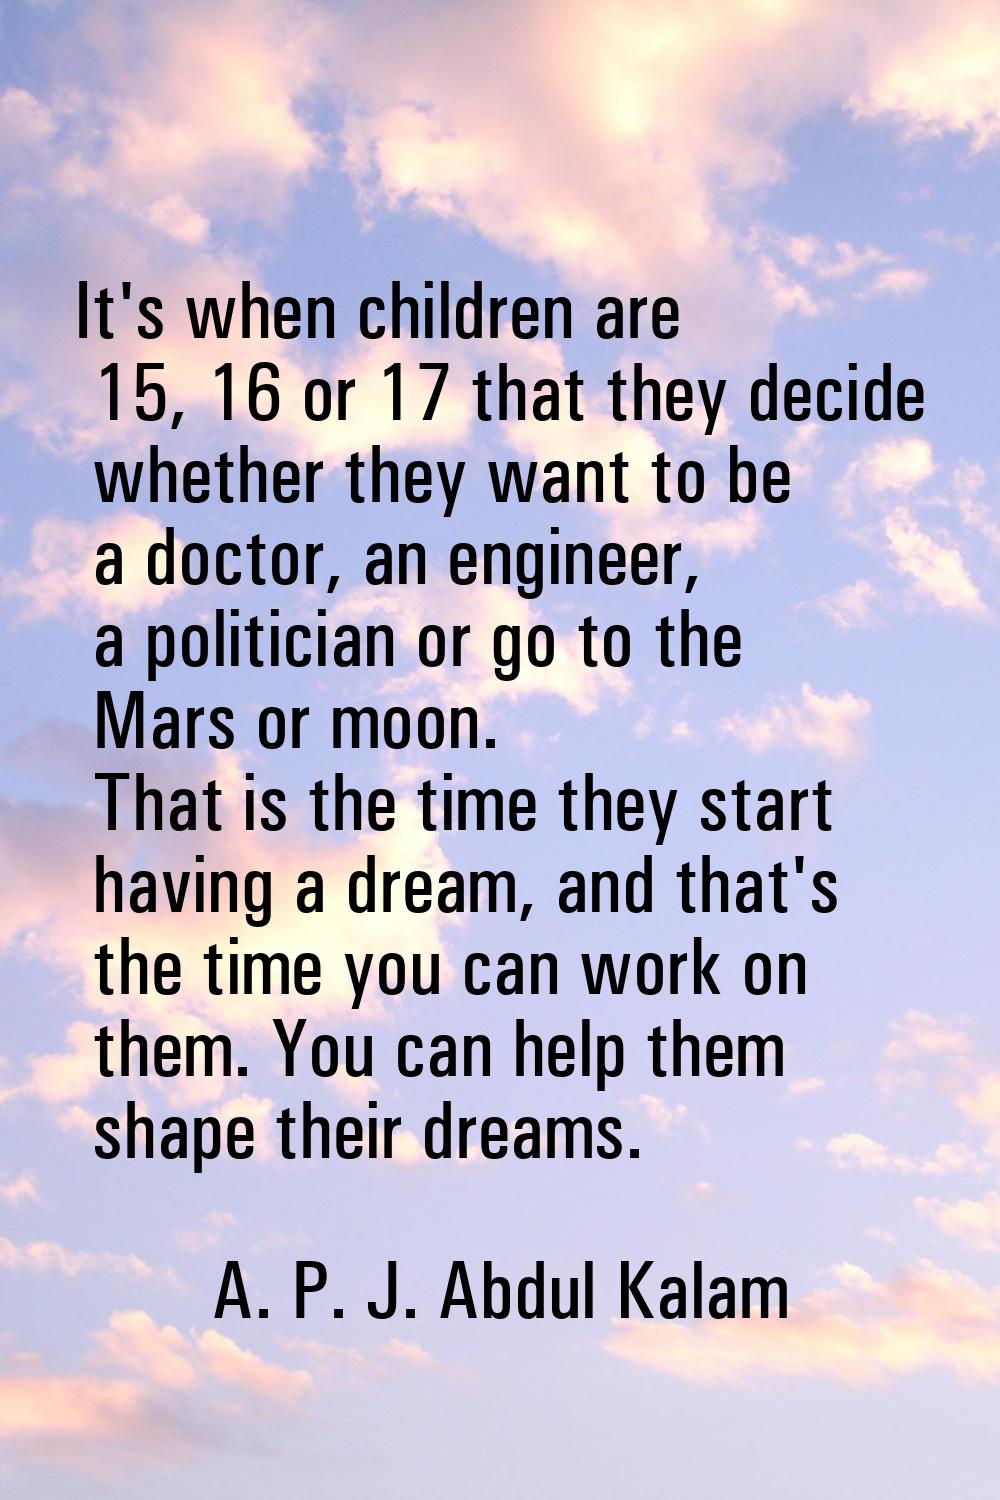 It's when children are 15, 16 or 17 that they decide whether they want to be a doctor, an engineer,